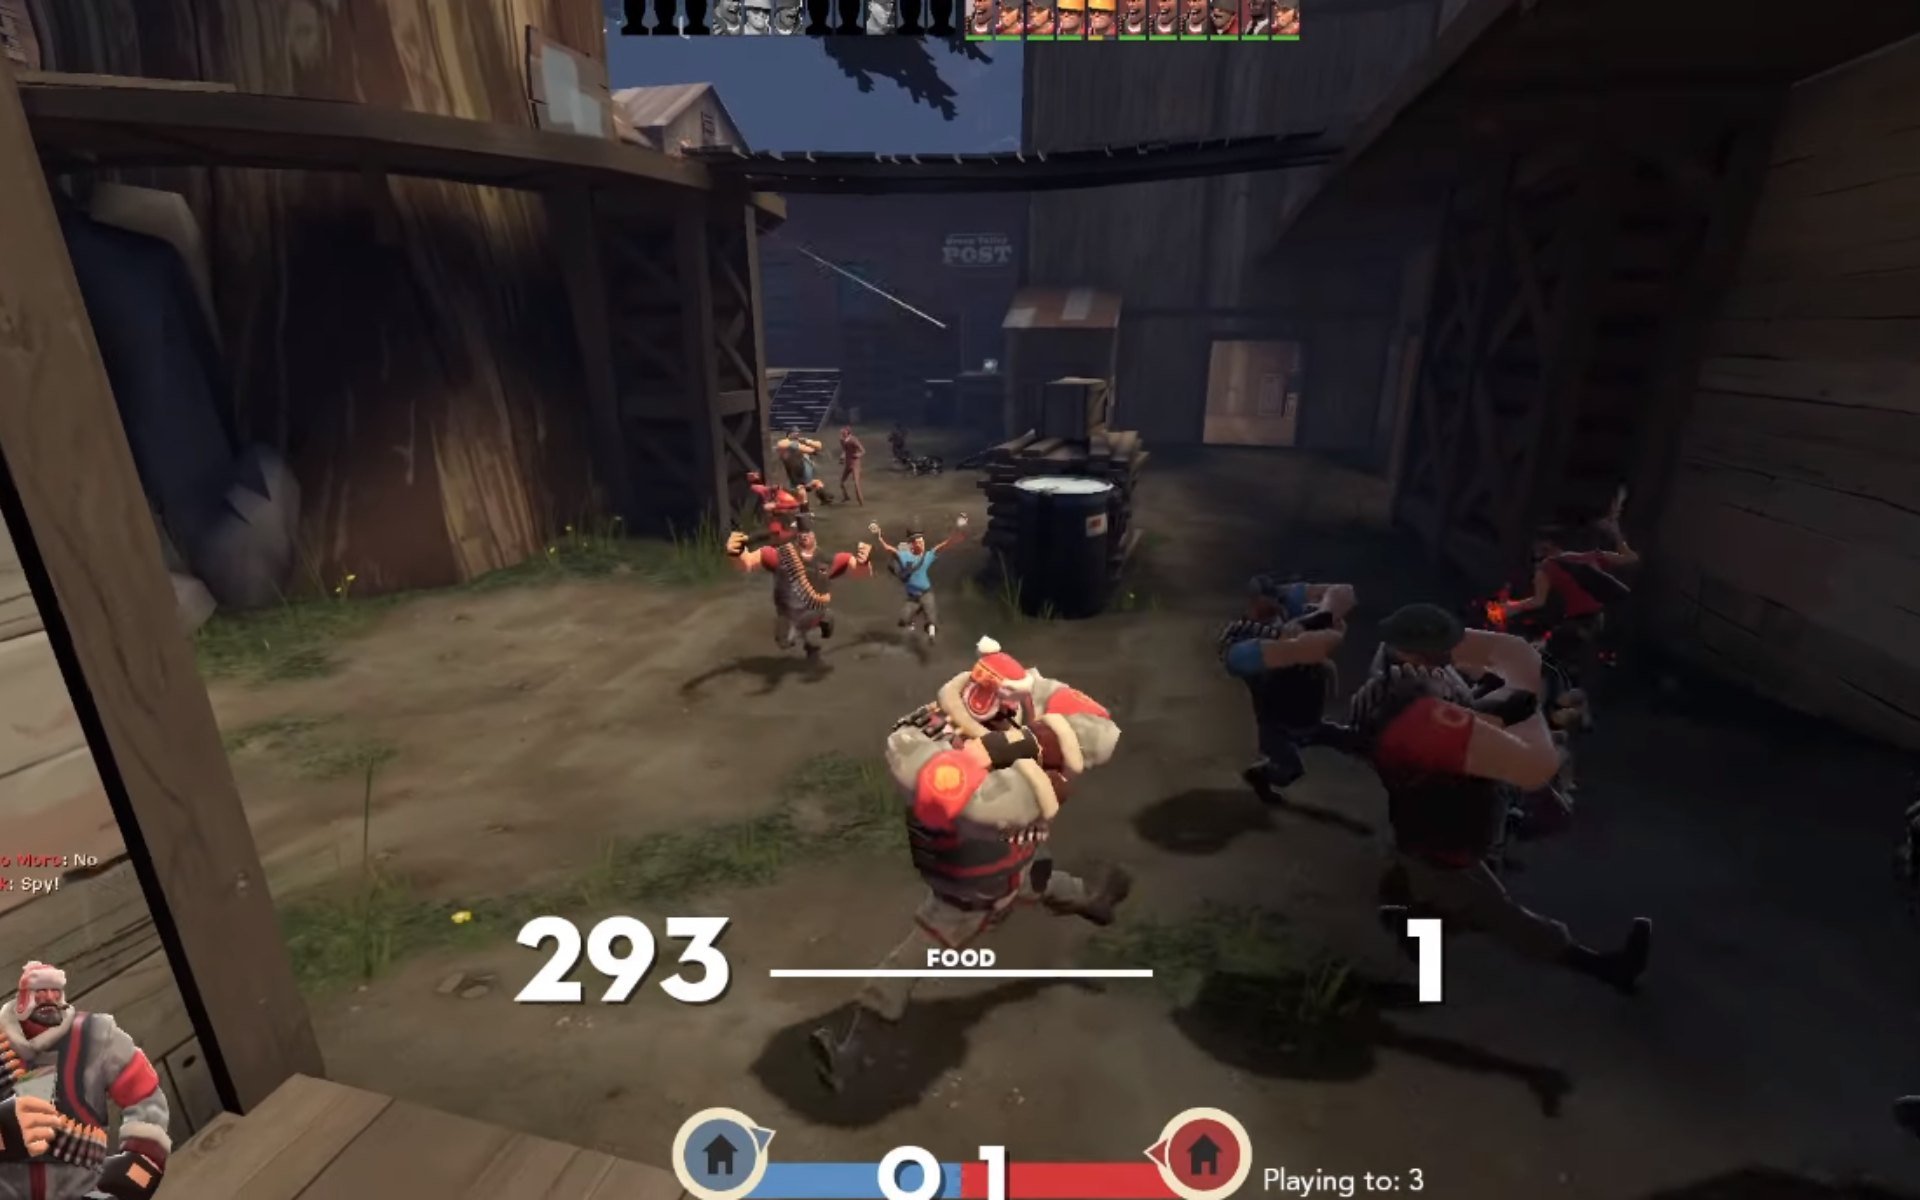 Despite being more than 15 years old TF2 still has that charm to it | Source: YouTube(Cortez)